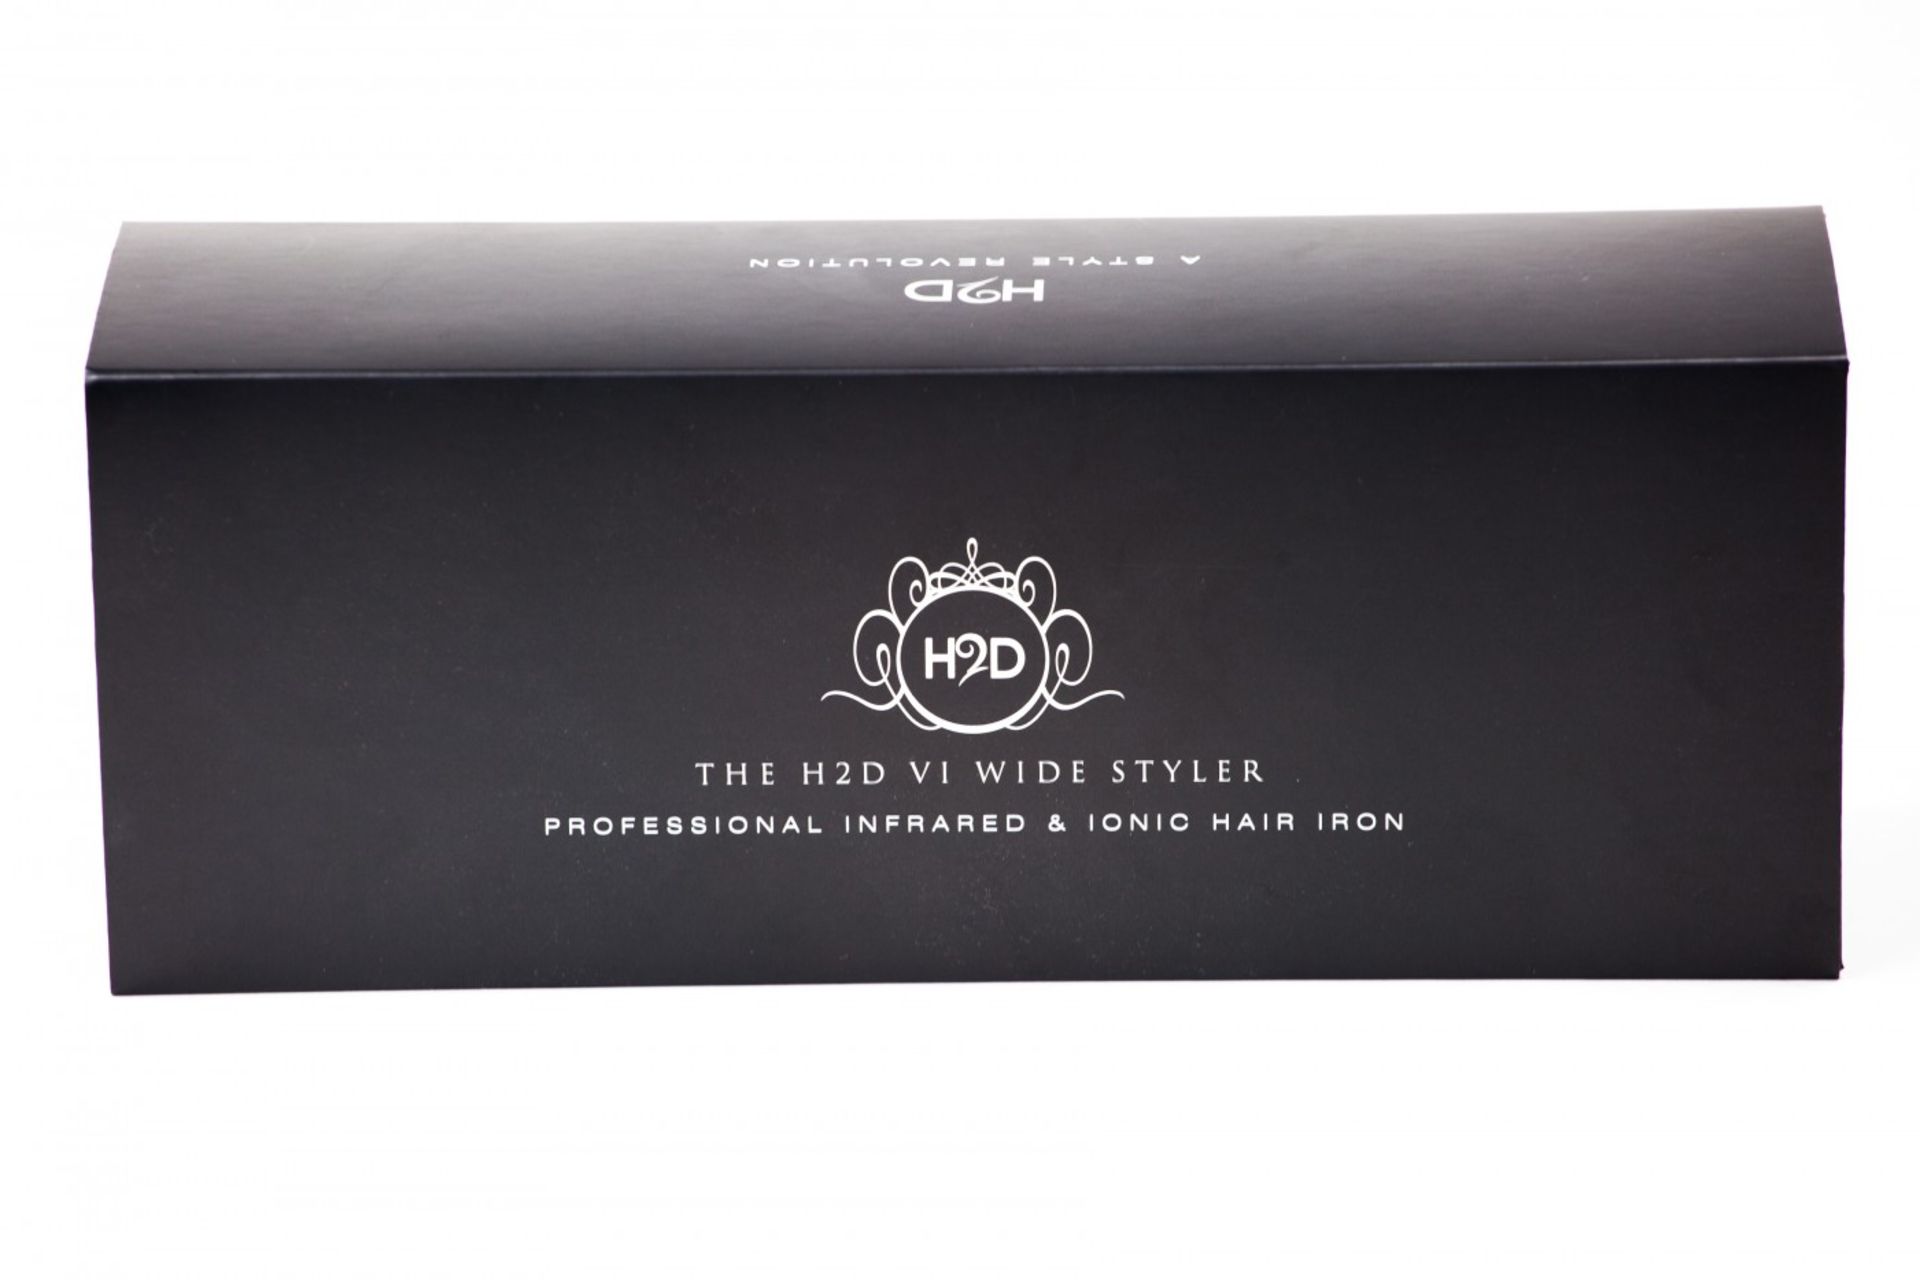 H2D WIDE PLATE PROFESSIONAL HAIR STRAIGHTENERS STYLER n(Boxed) - Brand: H2D - Max. Temperature: - Image 2 of 2